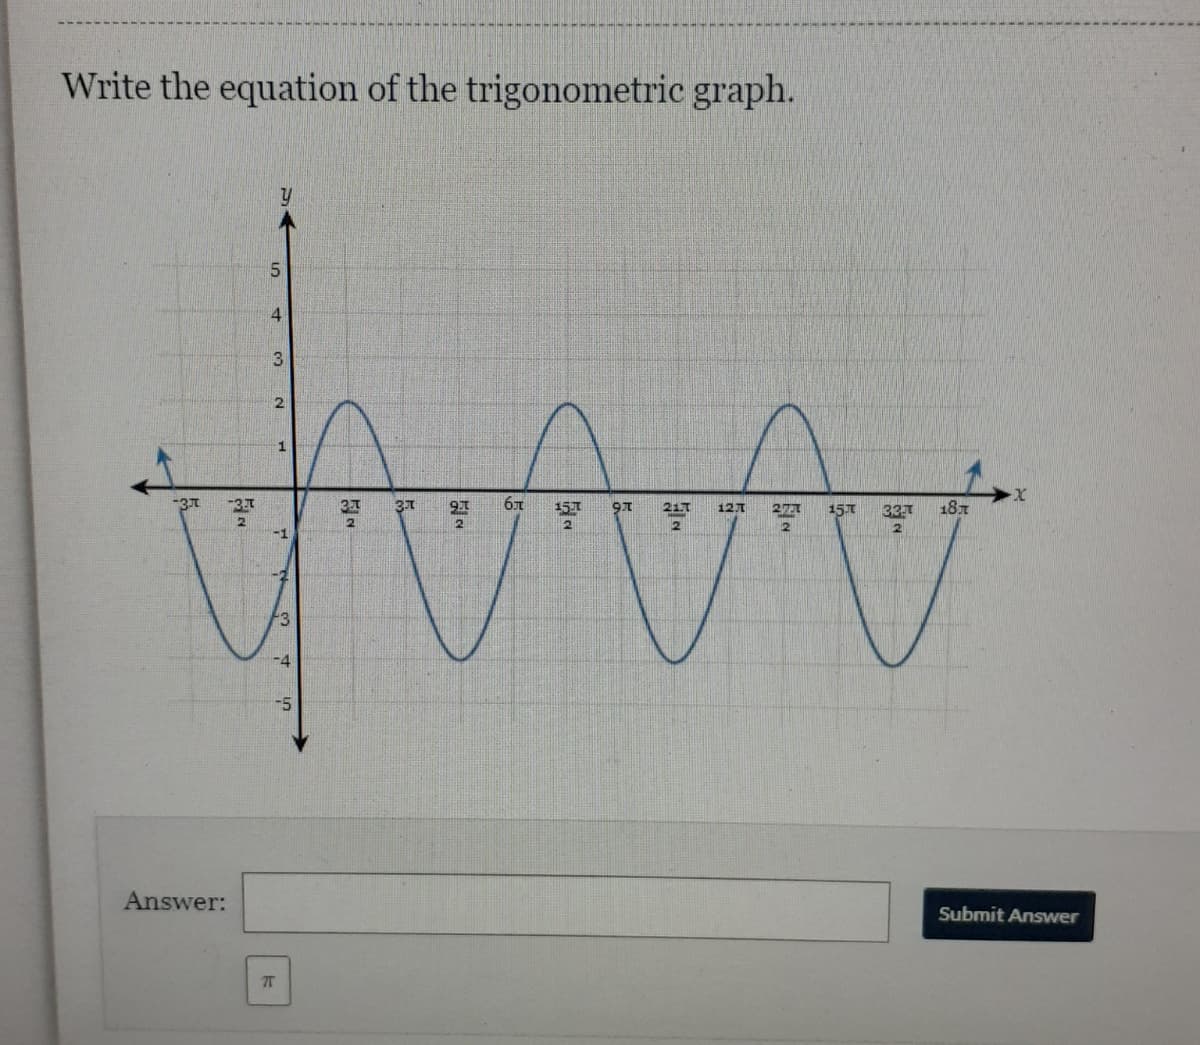 Write the equation of the trigonometric graph.
4
3
37
151
21.T
12A
277
15.7
33T
187
2.
2
2
2
Answer:
Submit Answer
